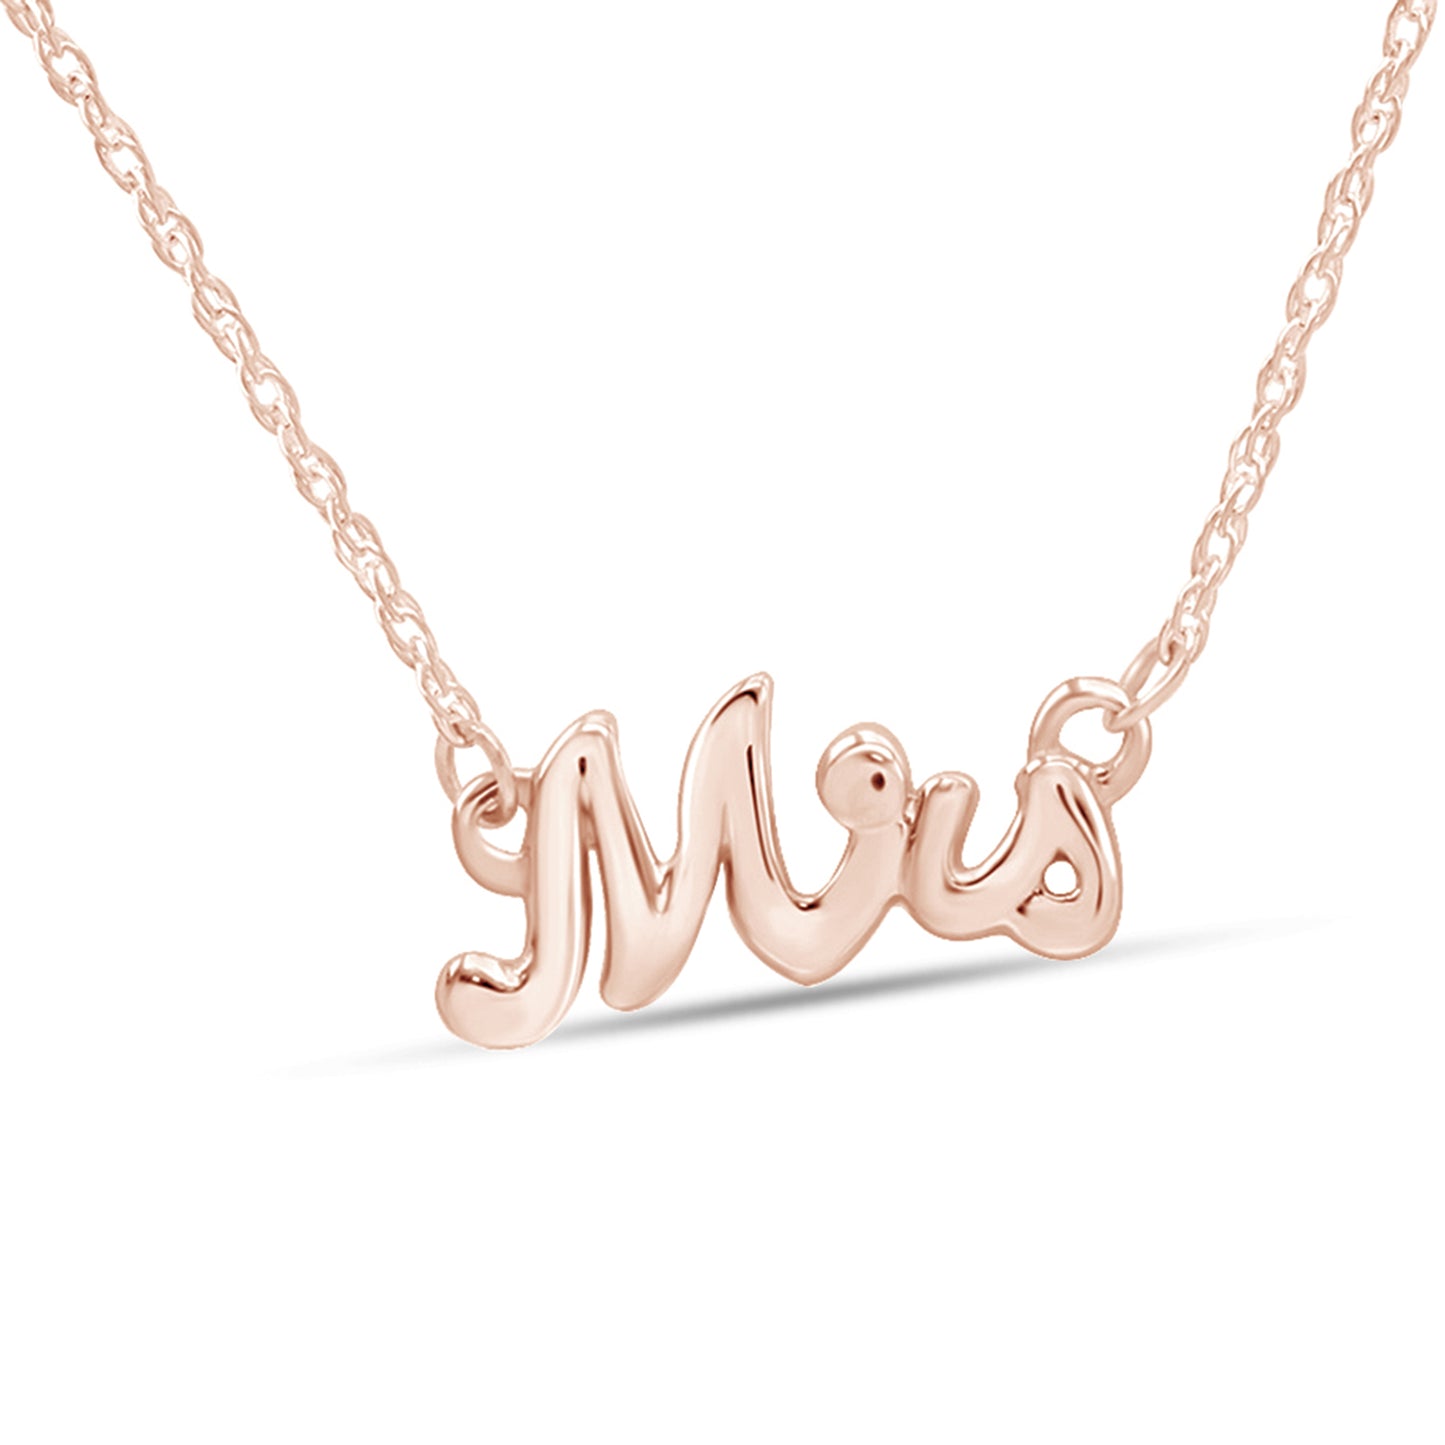 Load image into Gallery viewer, Mrs. Pendant Necklace For Womens In Sterling Silver
